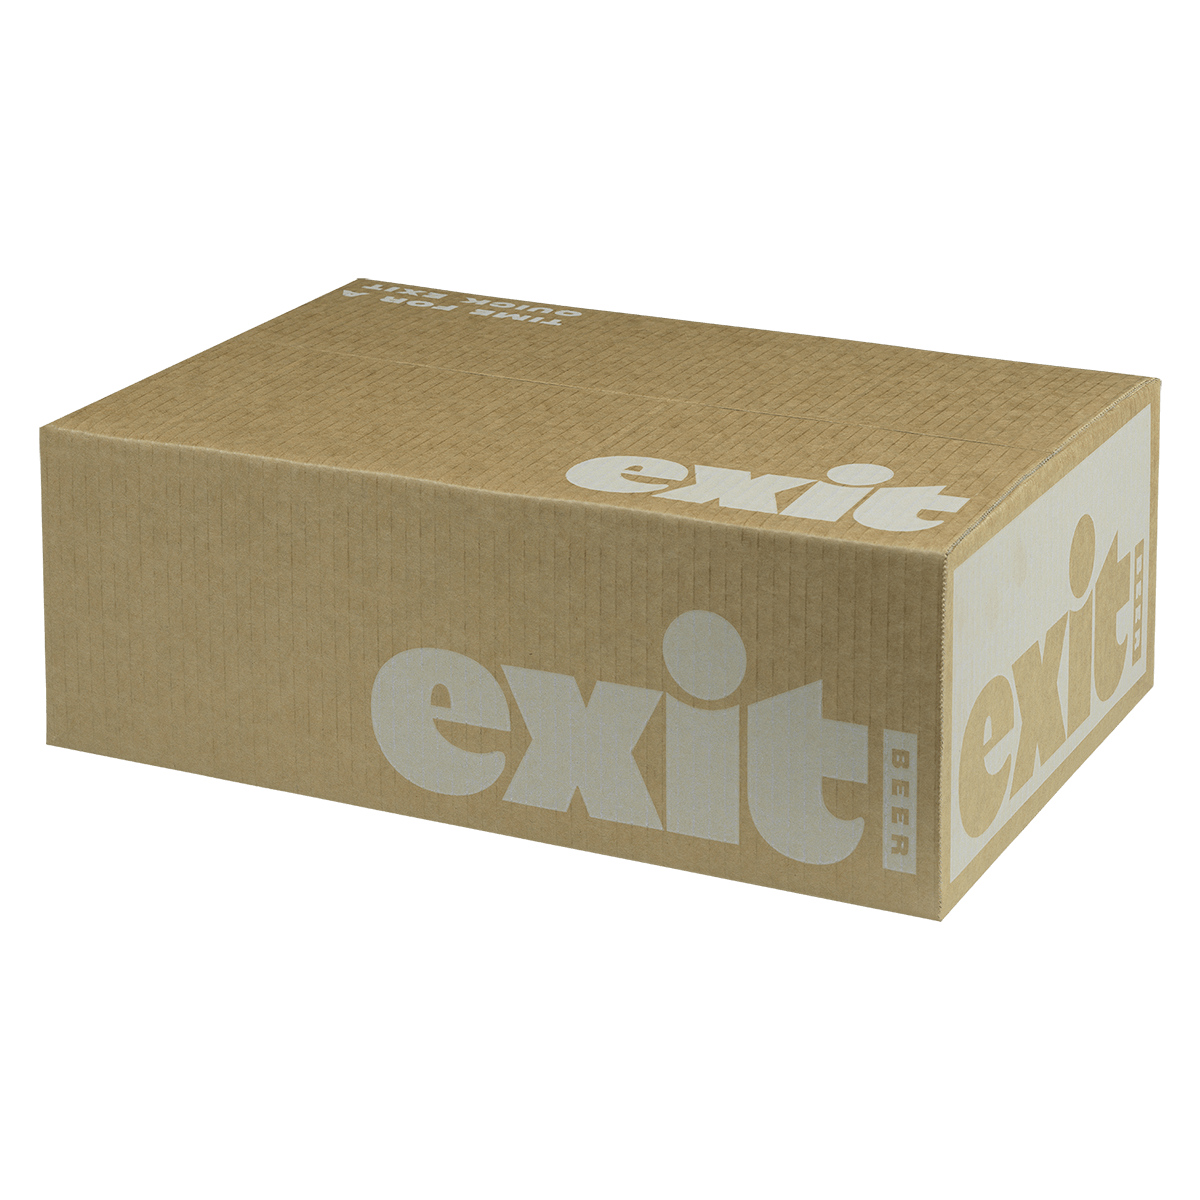 Exit Brewing Double IPA SOLD OUT